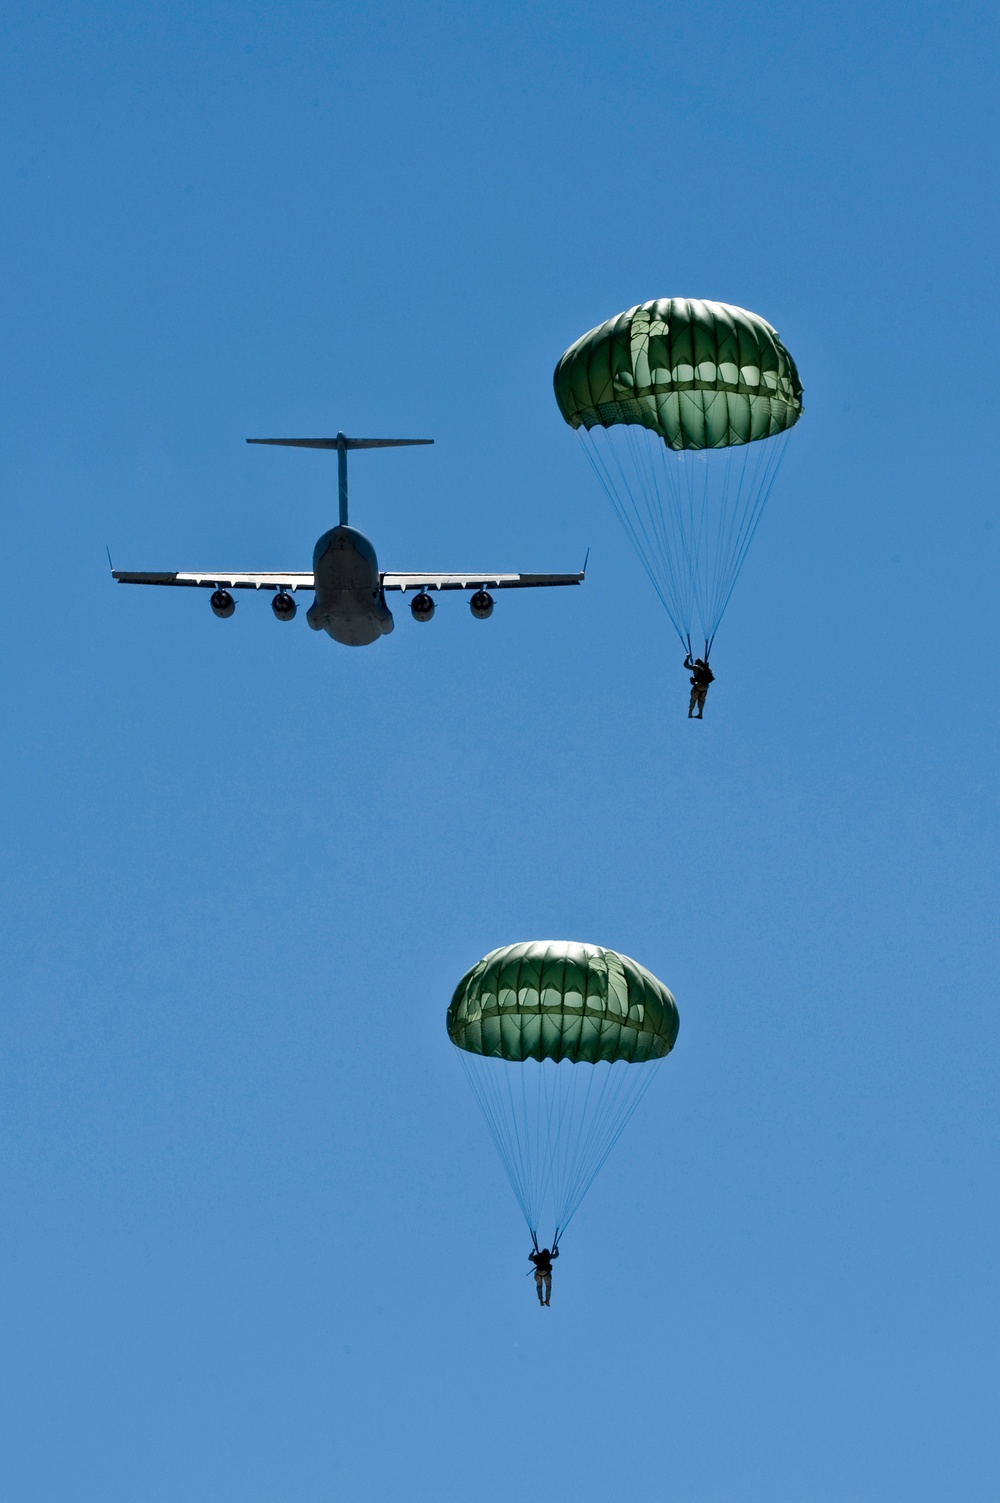 820th Airborne RED HORSE receive Drop Zone certification training